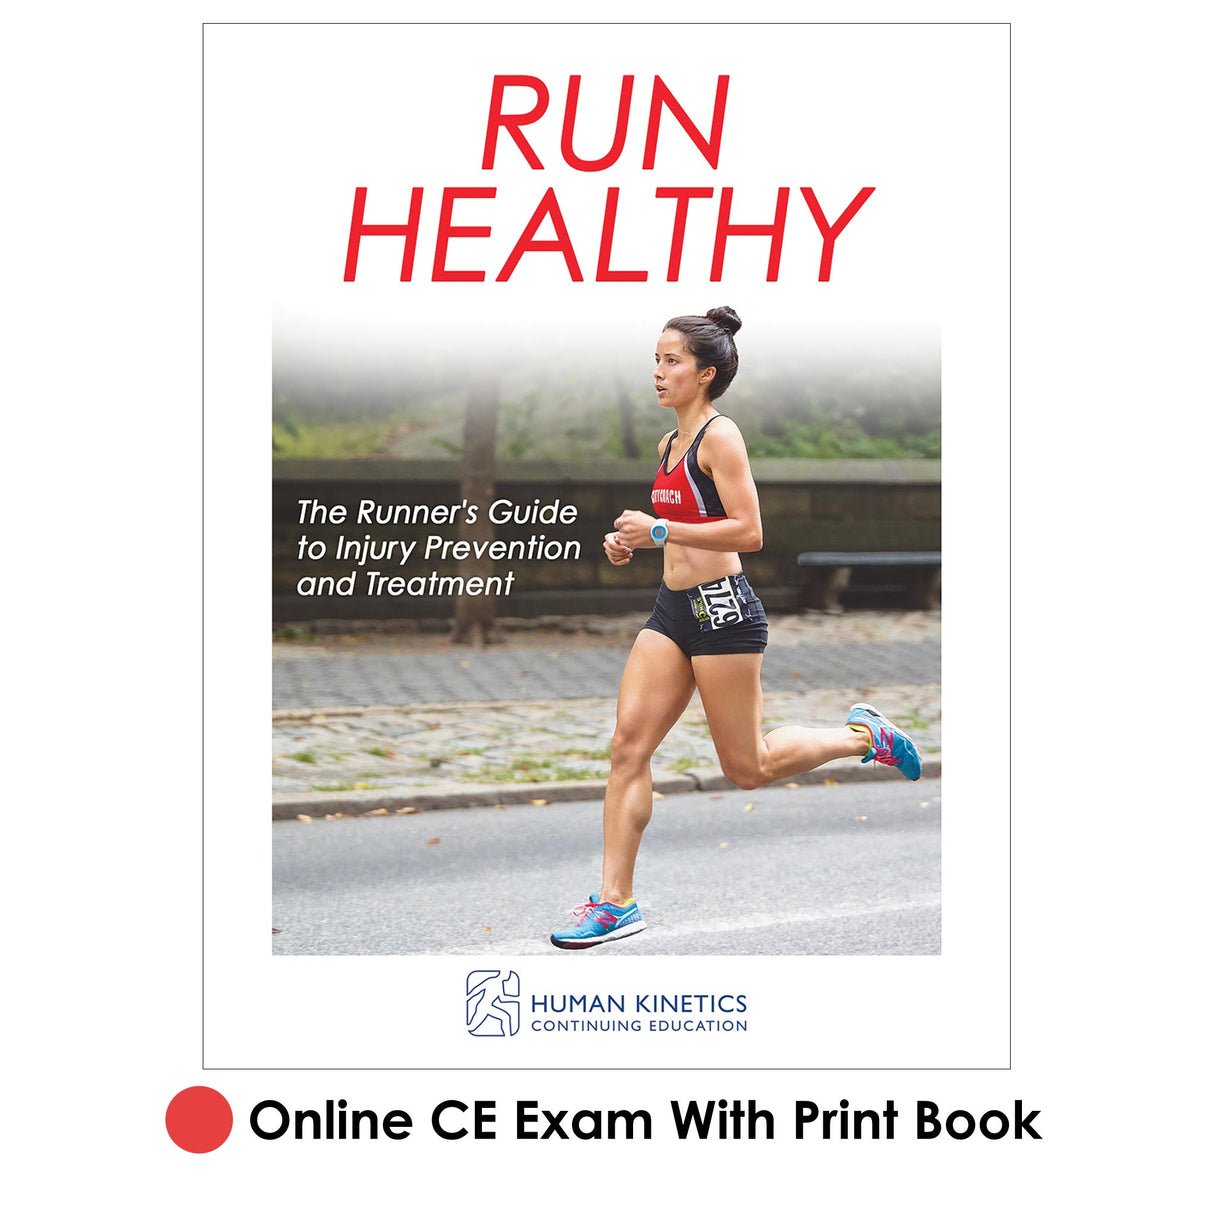 Run Healthy Online CE Exam With Print Book